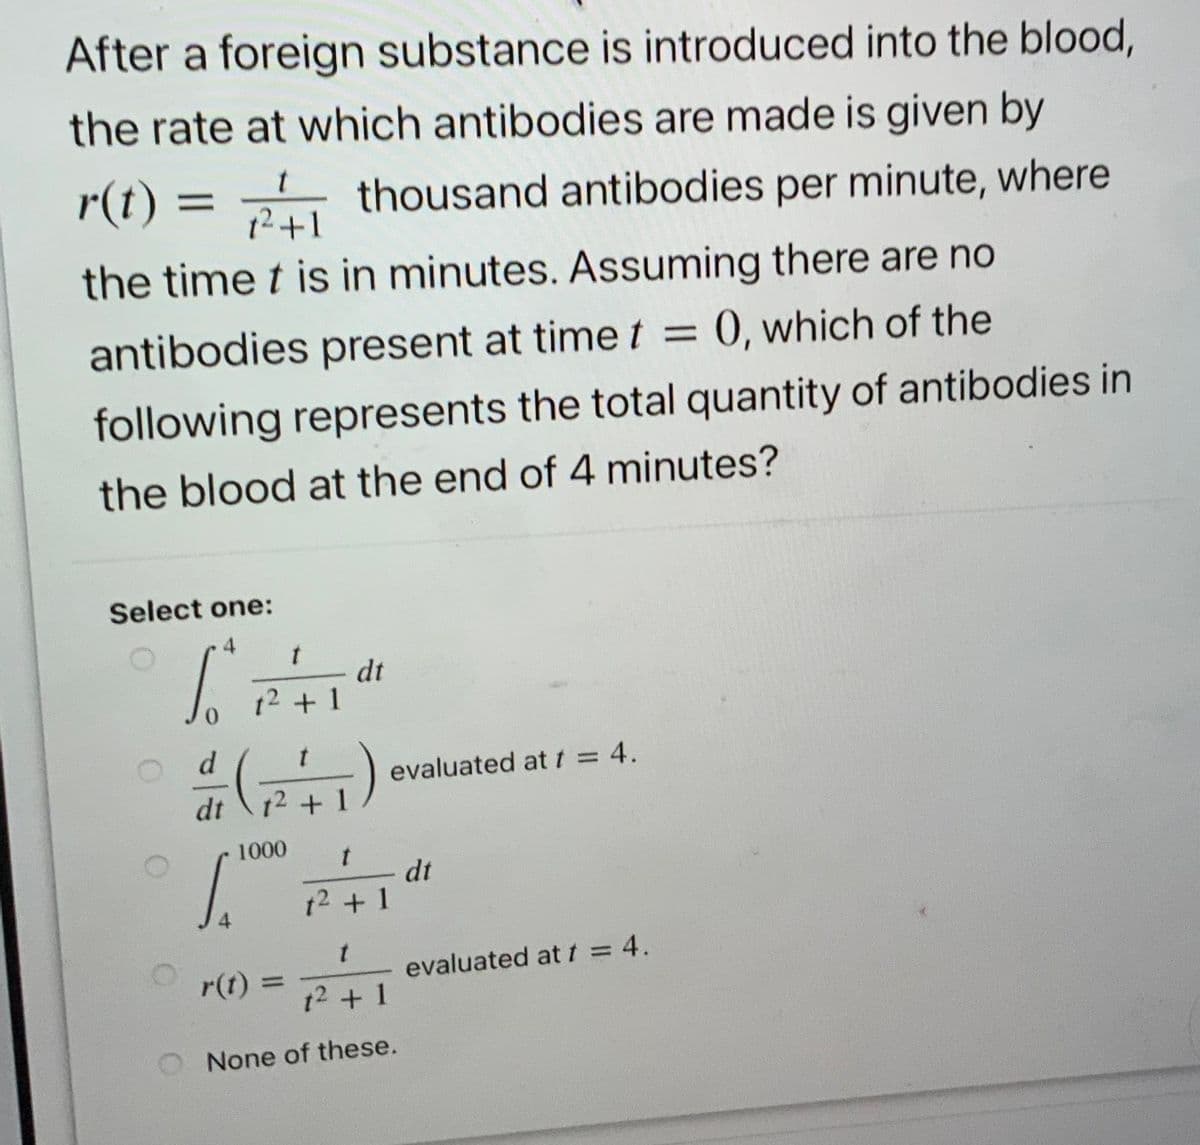 After a foreign substance is introduced into the blood,
the rate at which antibodies are made is given by
r(t) =
thousand antibodies per minute, where
12+1
the time t is in minutes. Assuming there are no
antibodies present at timet =
= 0, which of the
following represents the total quantity of antibodies in
the blood at the end of 4 minutes?
Select one:
dt
12 + 1
d
evaluated at t = 4.
dt
12 + 1
1000
dt
t2 +1
4
r(t) =
evaluated at t = 4.
t2 +1
None of these.
